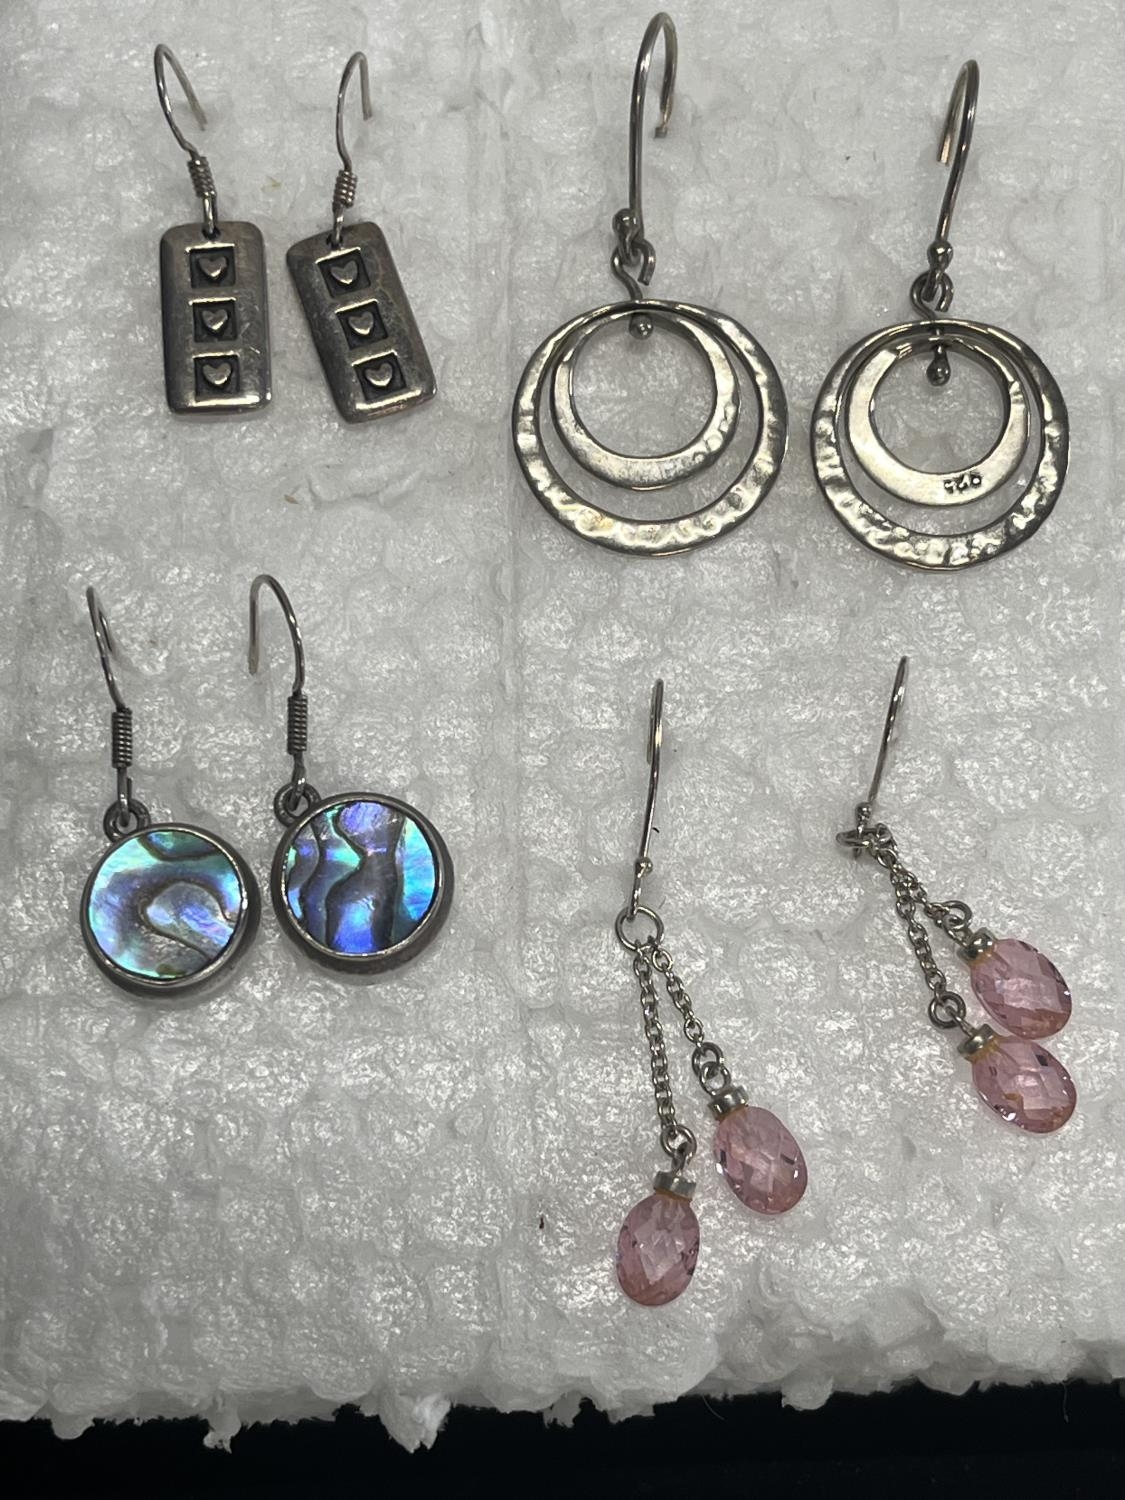 Four pairs of silver earrings